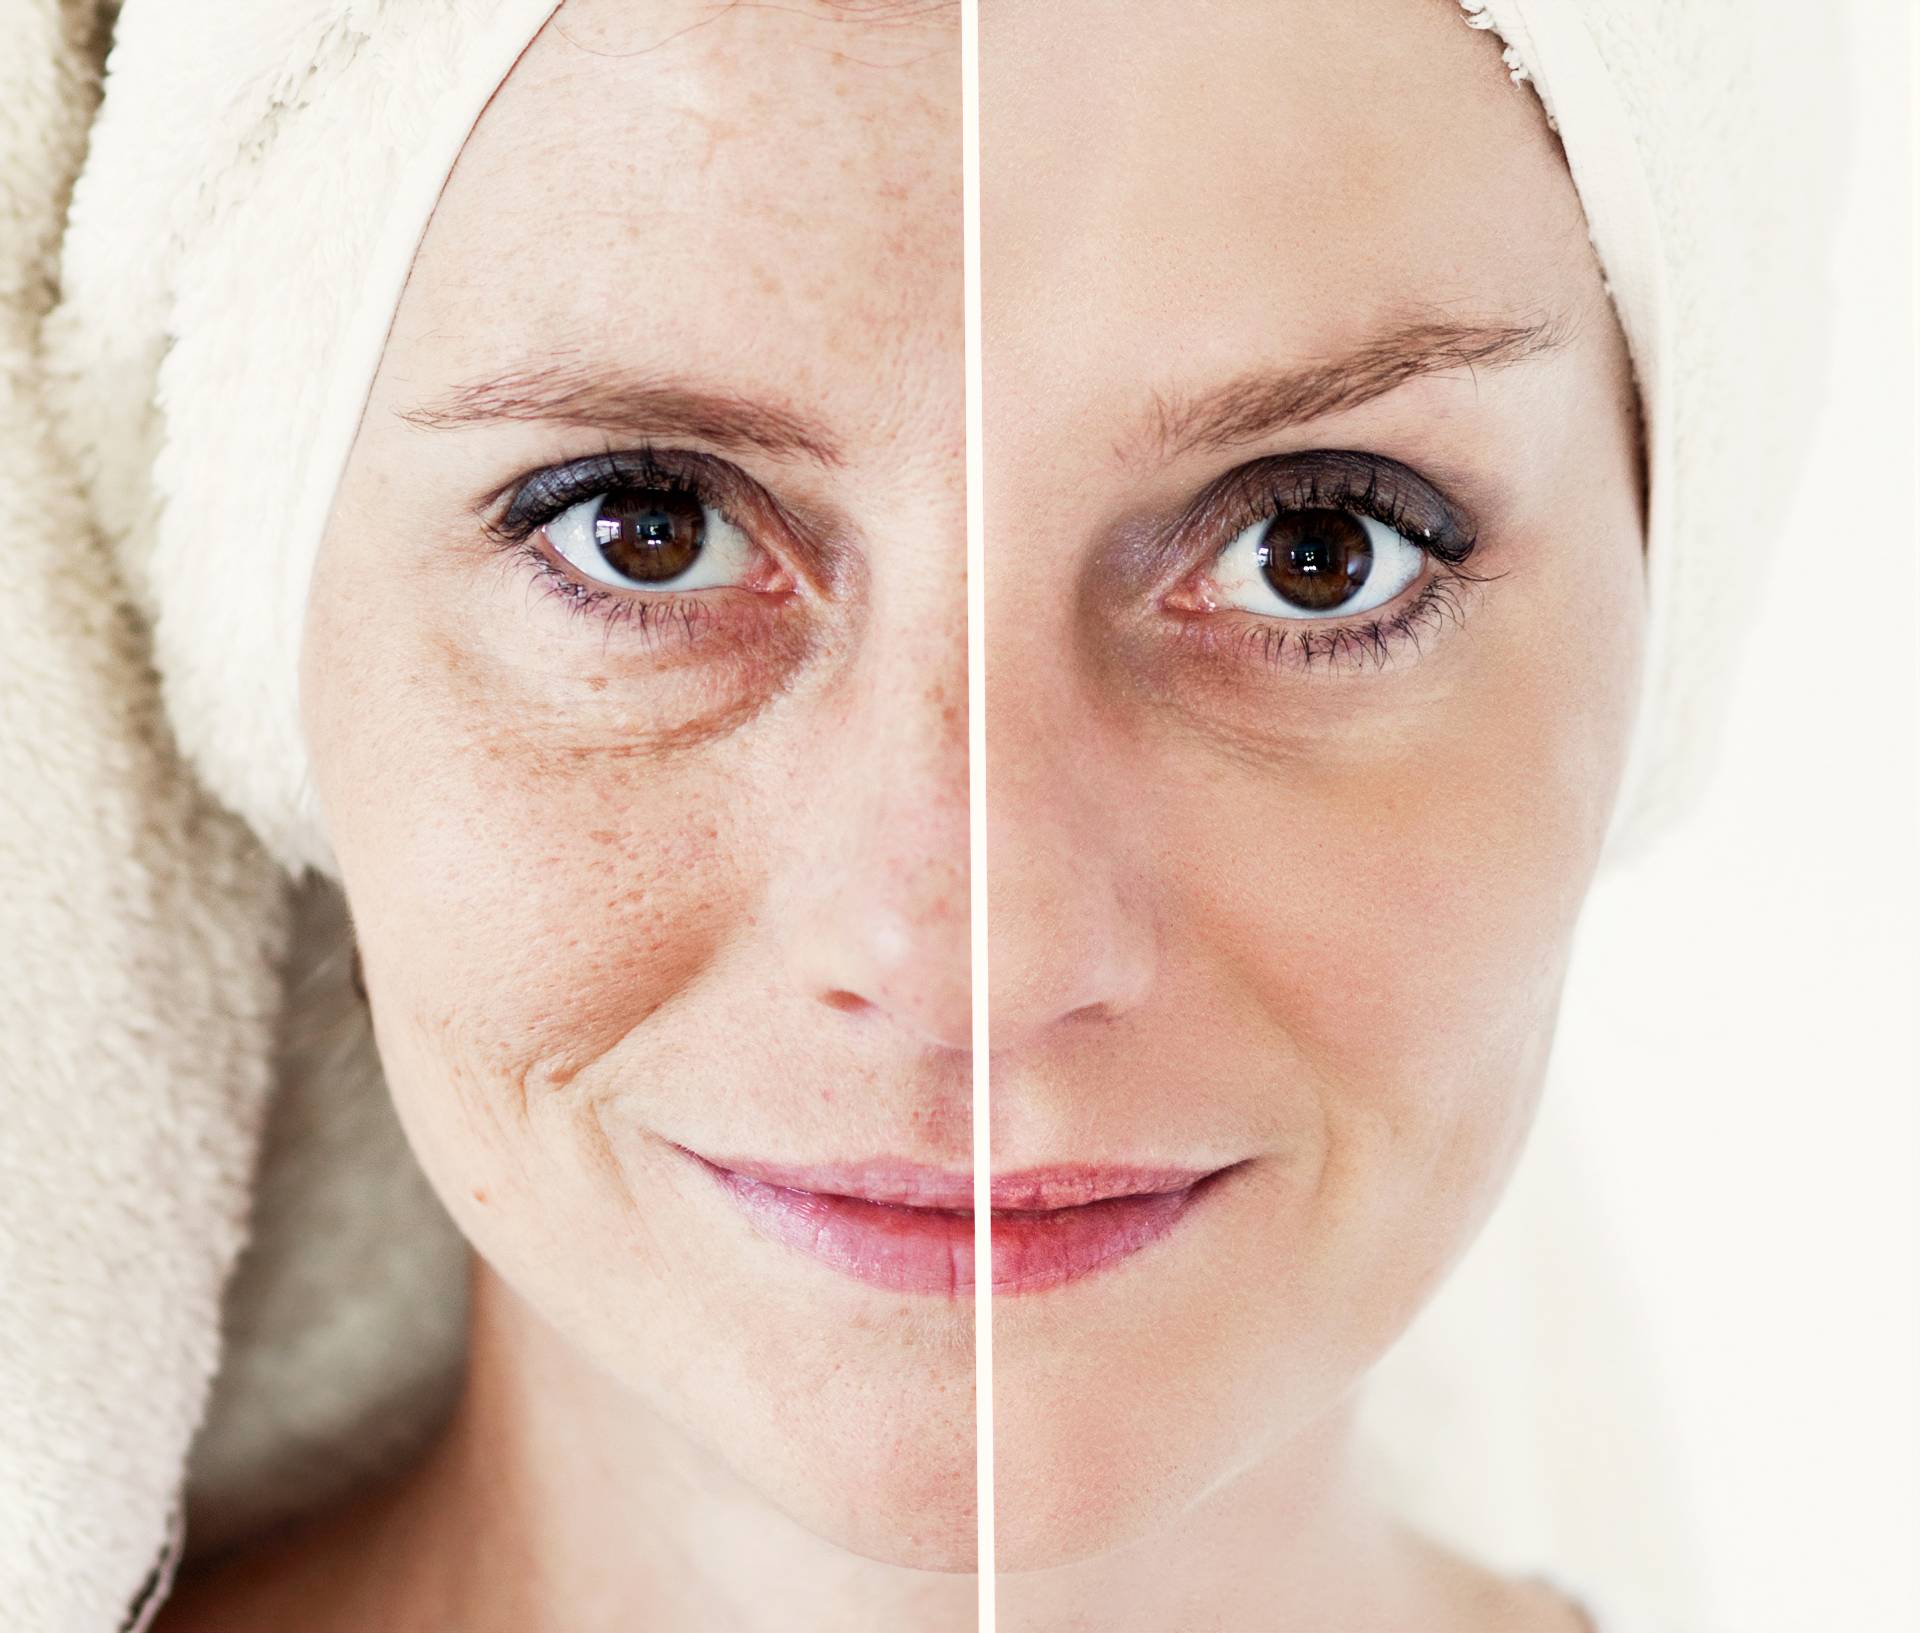 Skin Aging Obsession: What the Experts Say